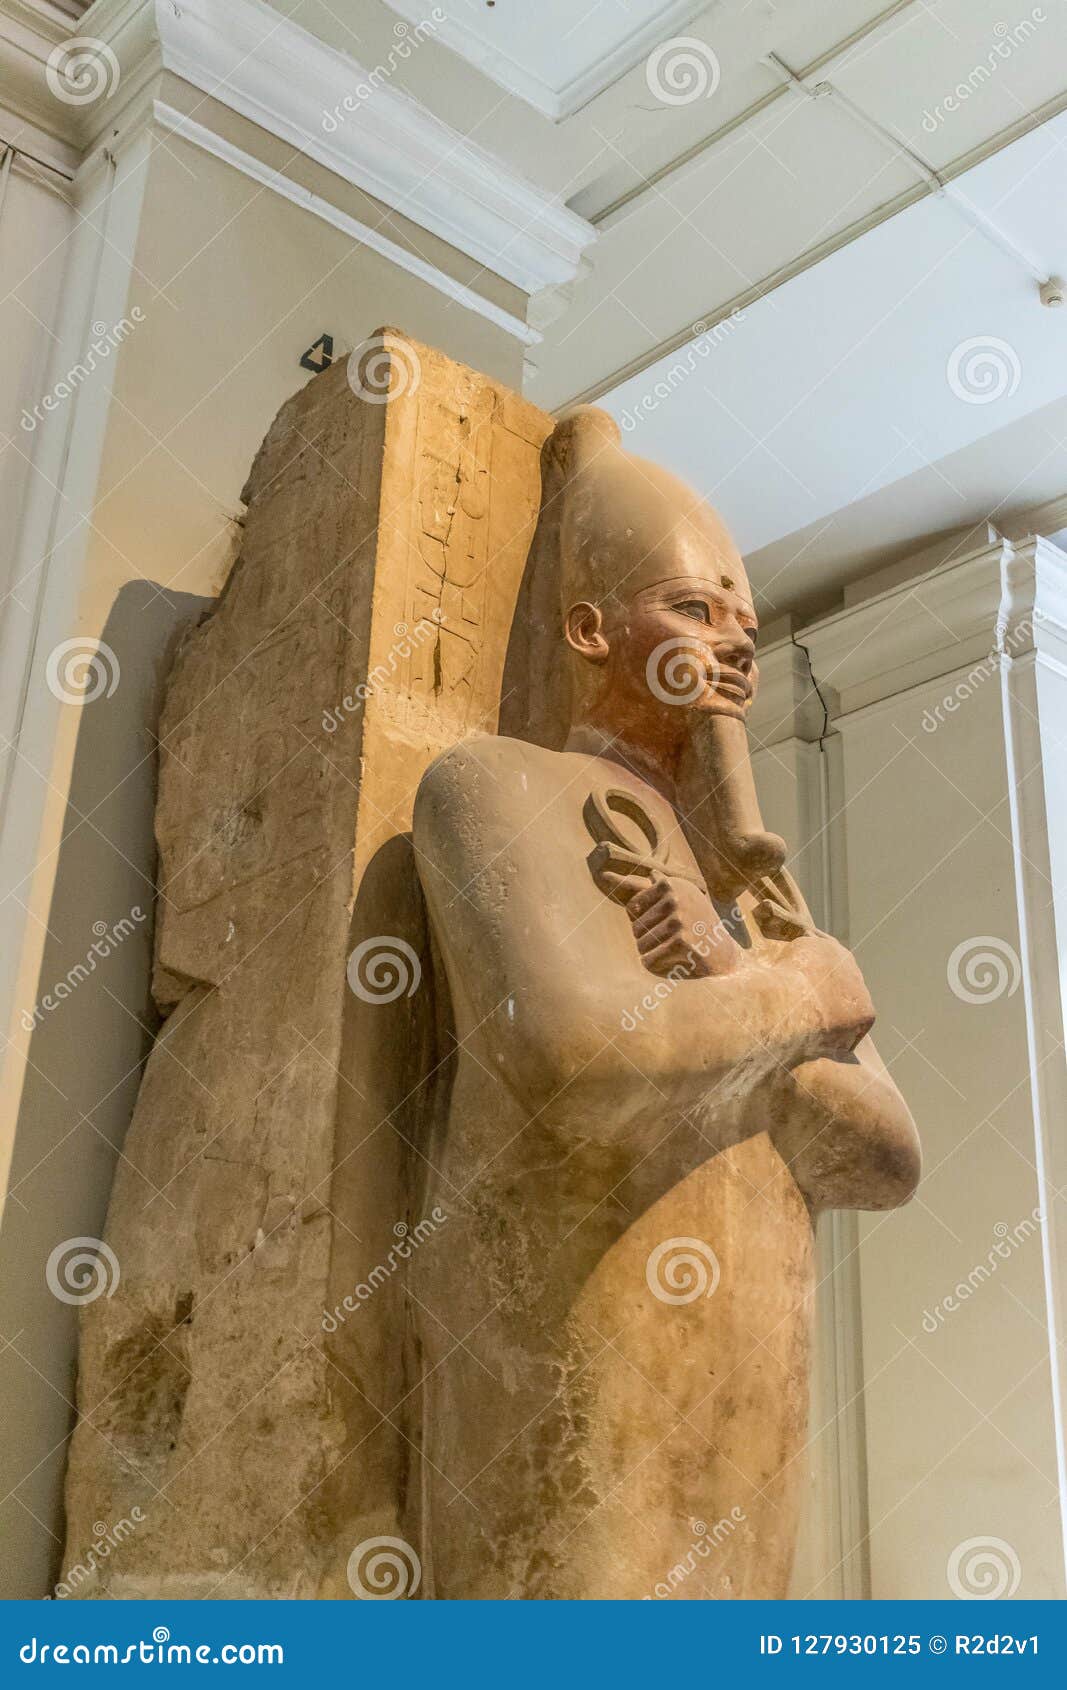 Statue De Pharaon D Egypte Antique Musee Du Caire Image Editorial Image Du Musee Pharaon